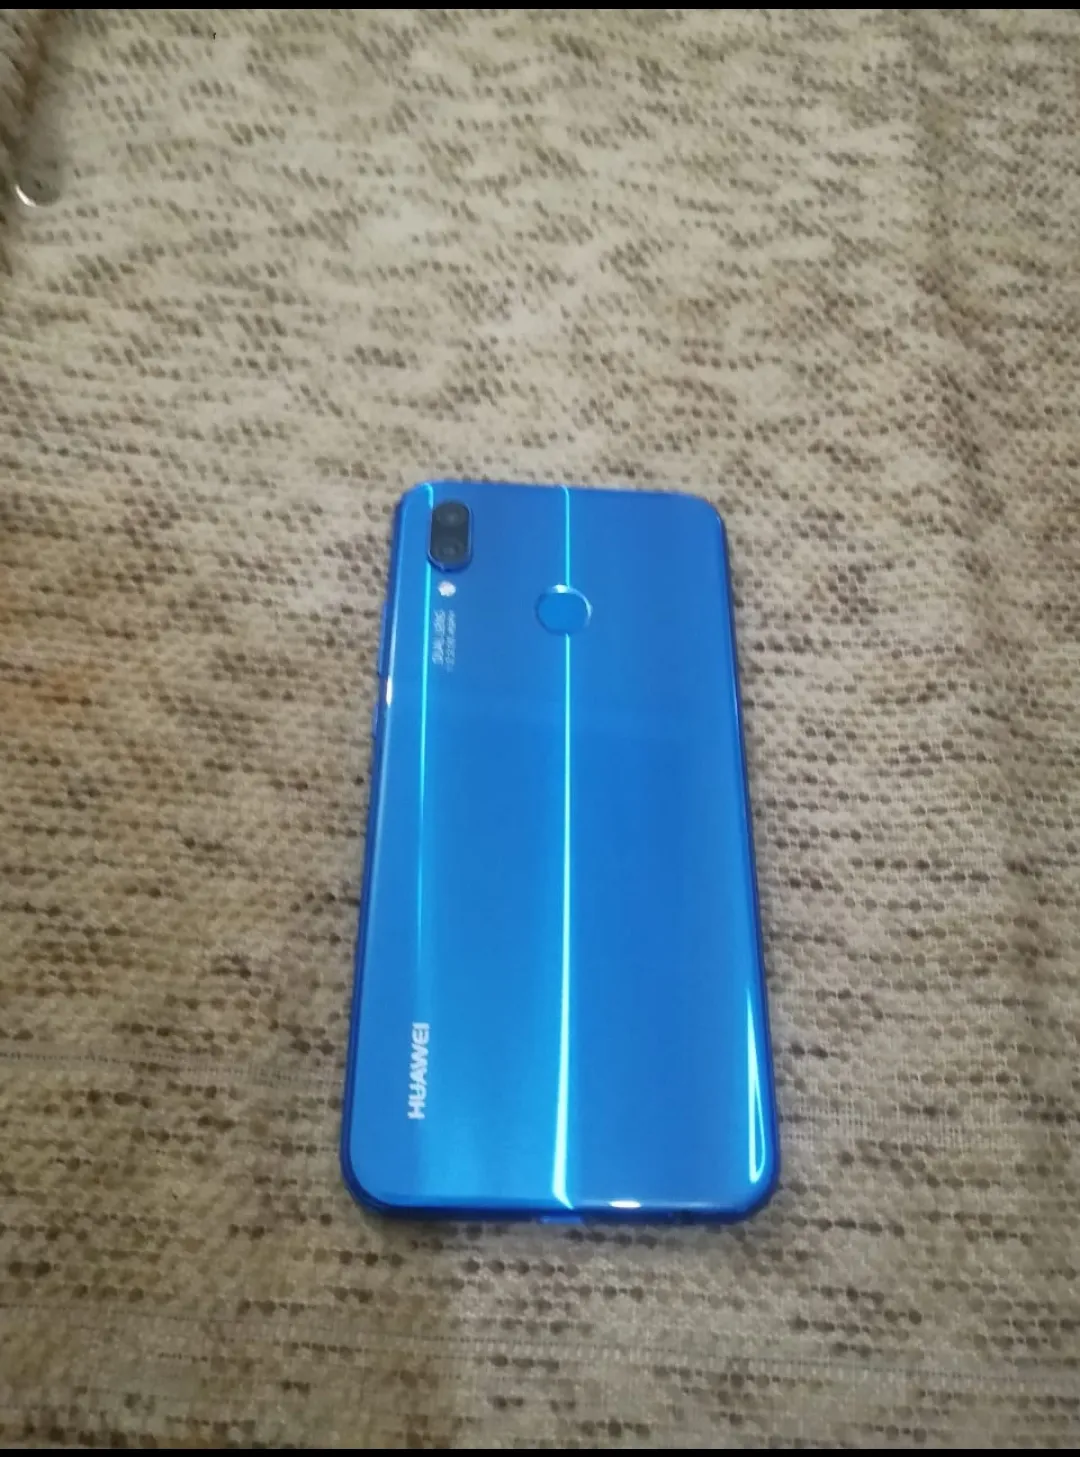 Huawei p20 lite for sale - photo 1